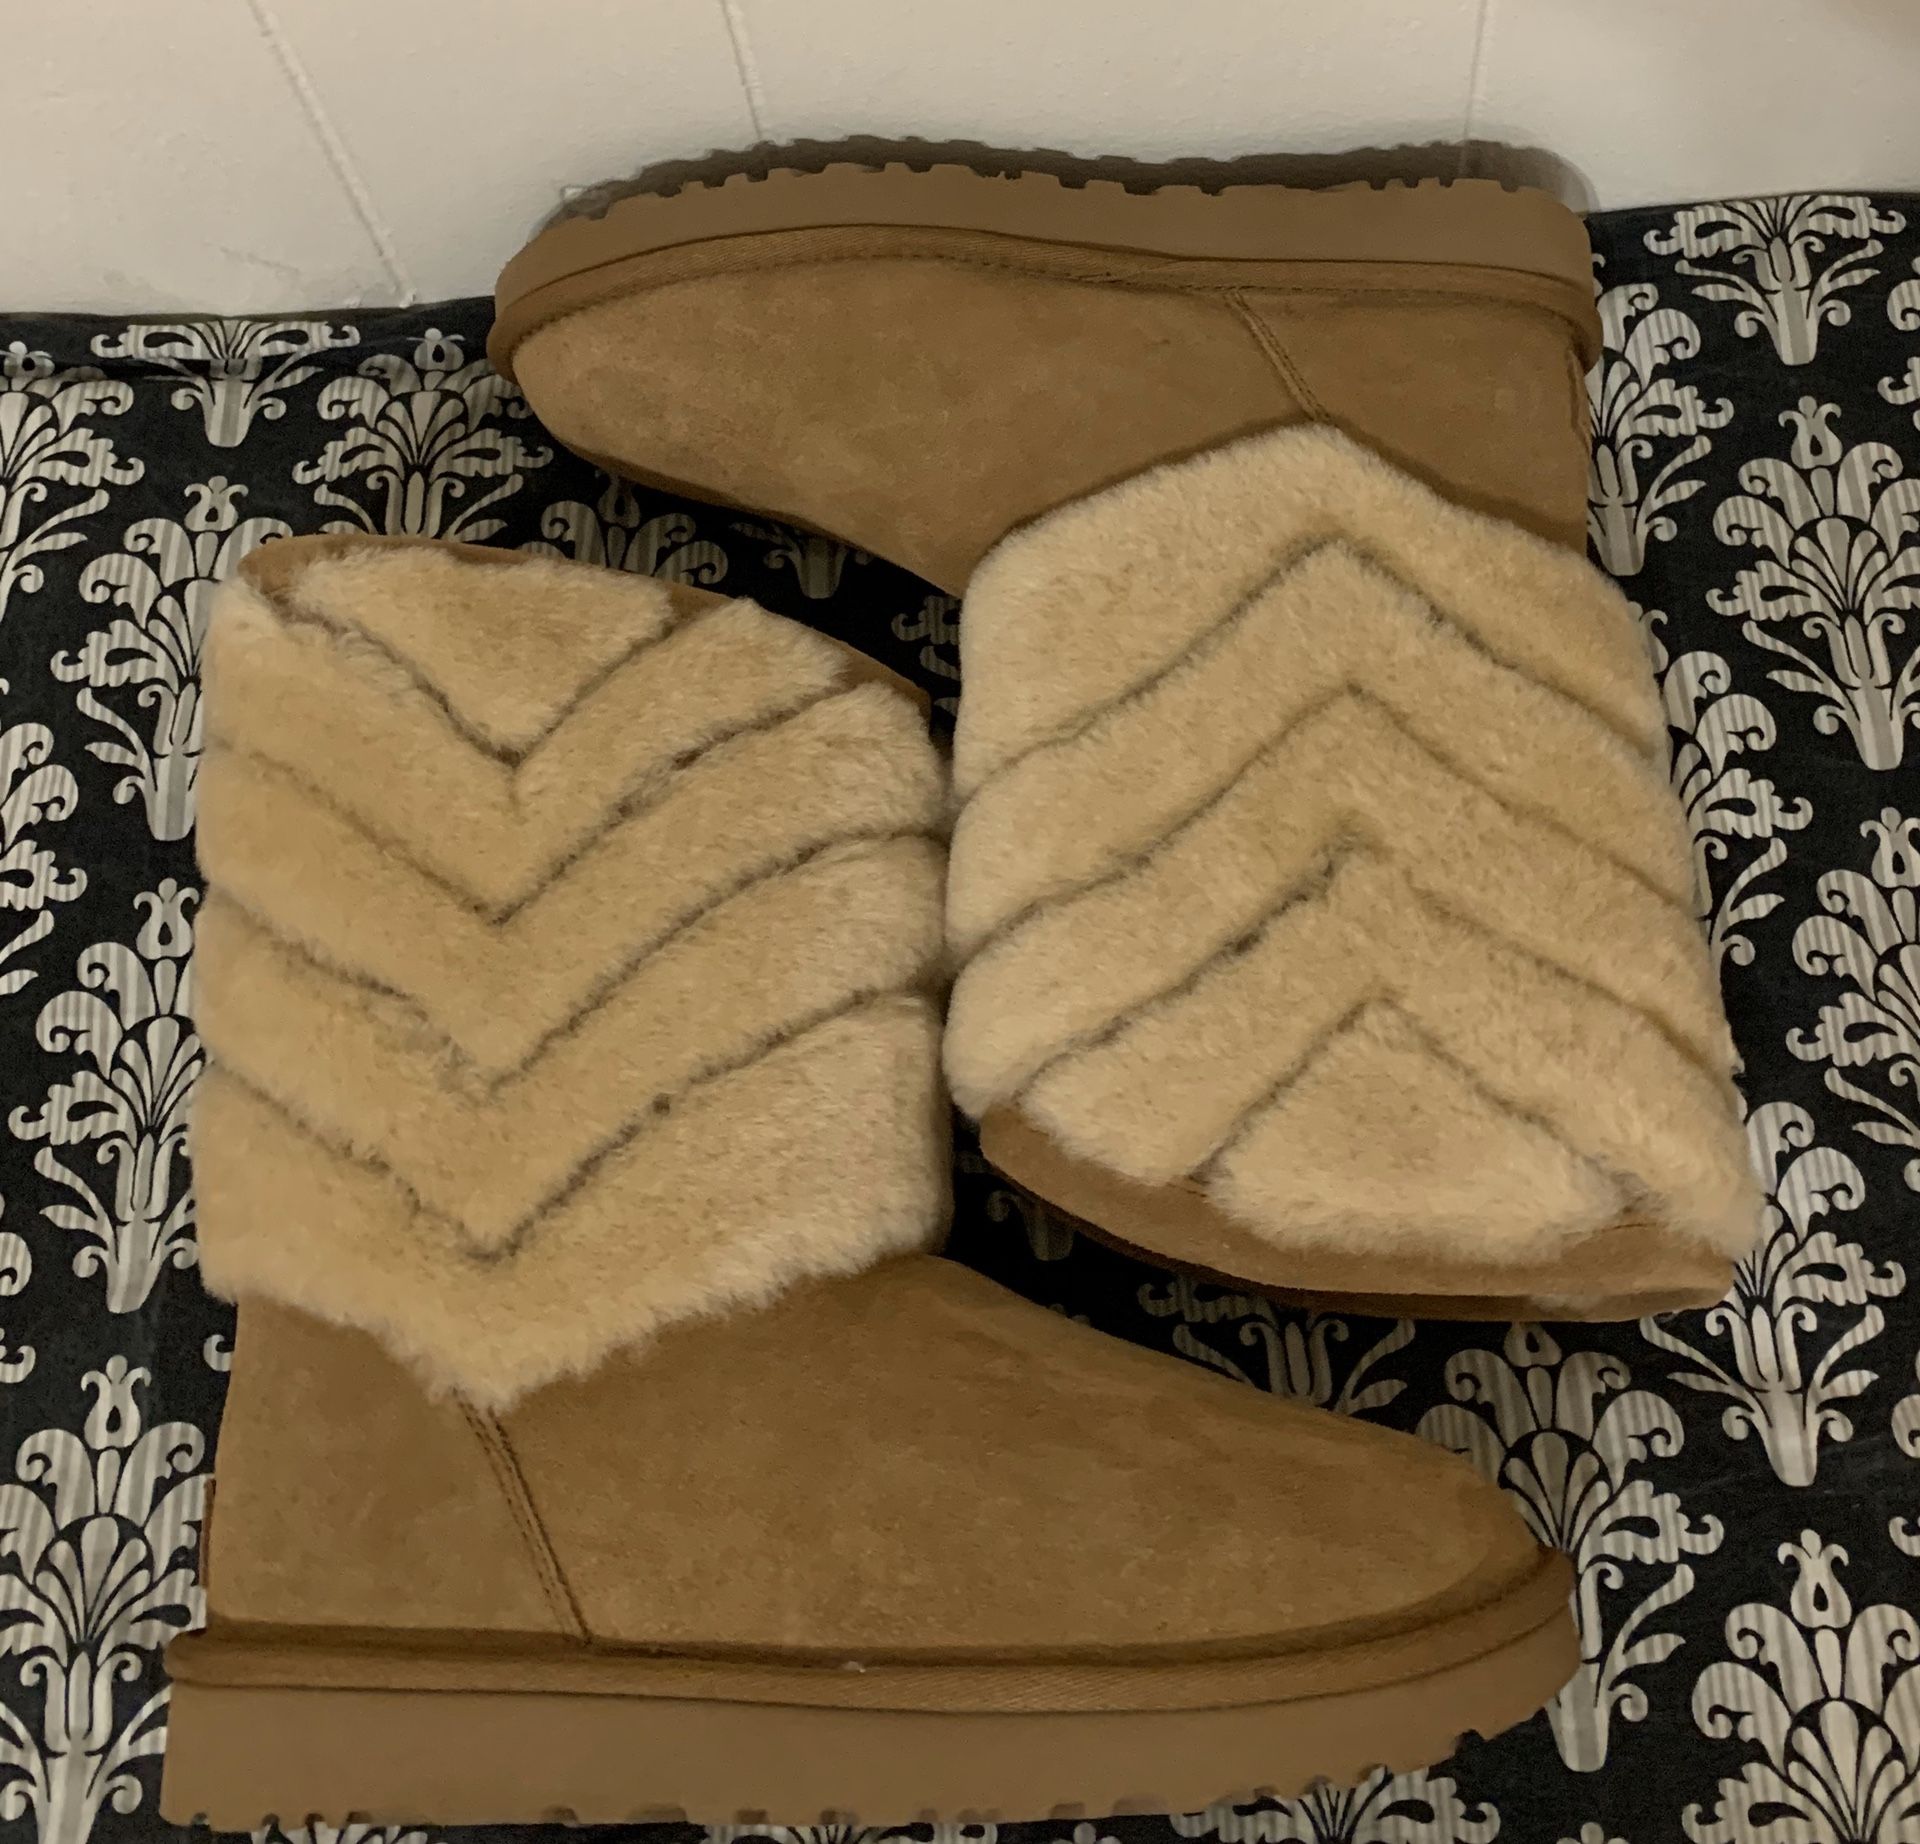 UGG Women's Tania Boots